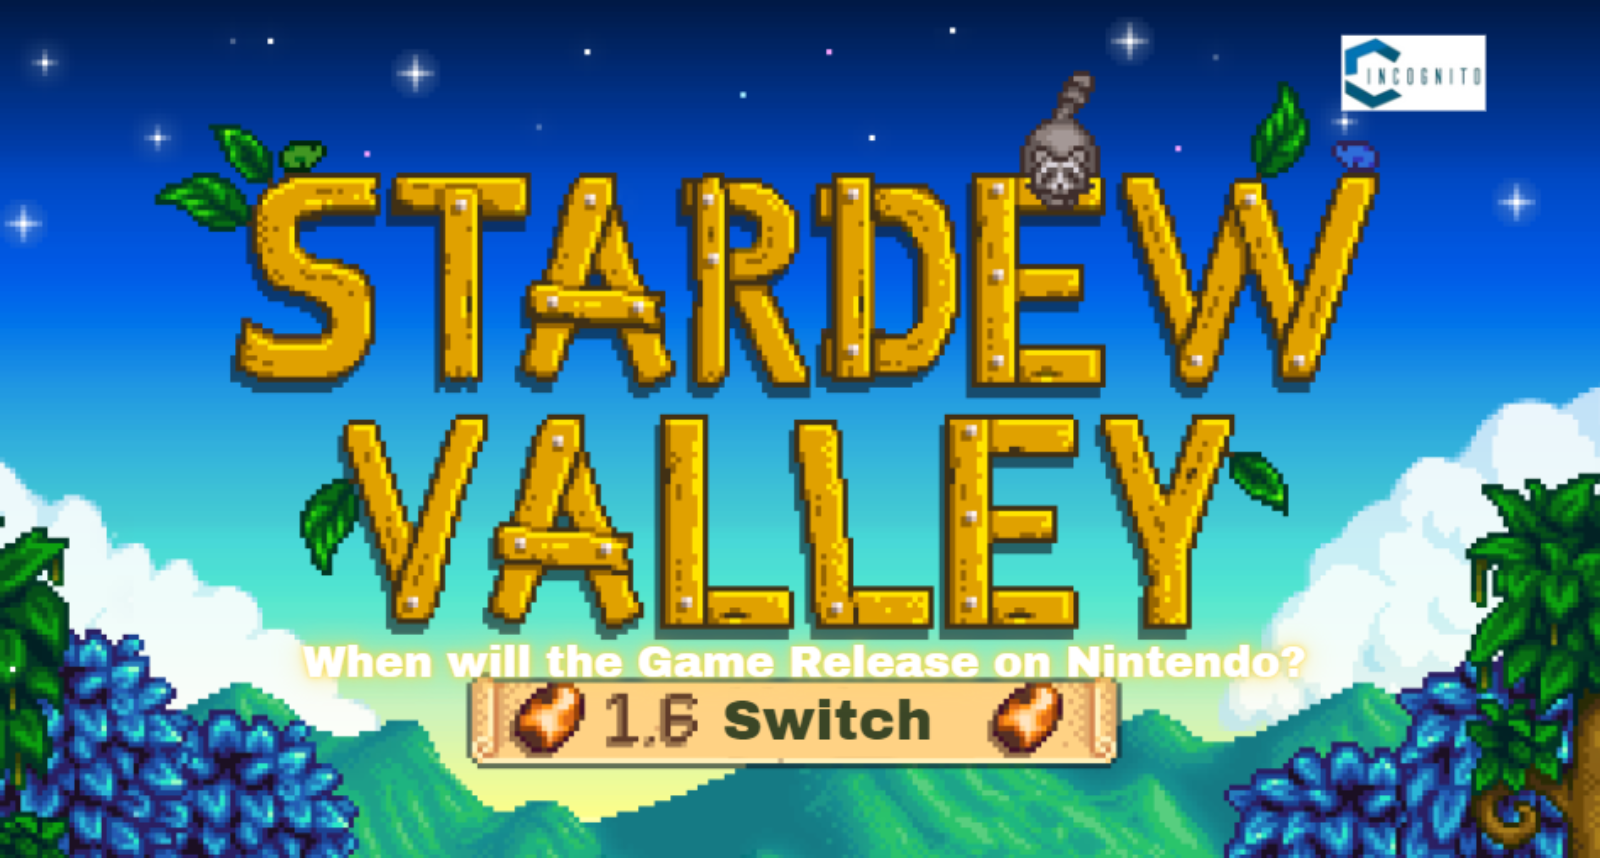 Stardew Valley 1.6 Switch: When will the Game Release on Nintendo?